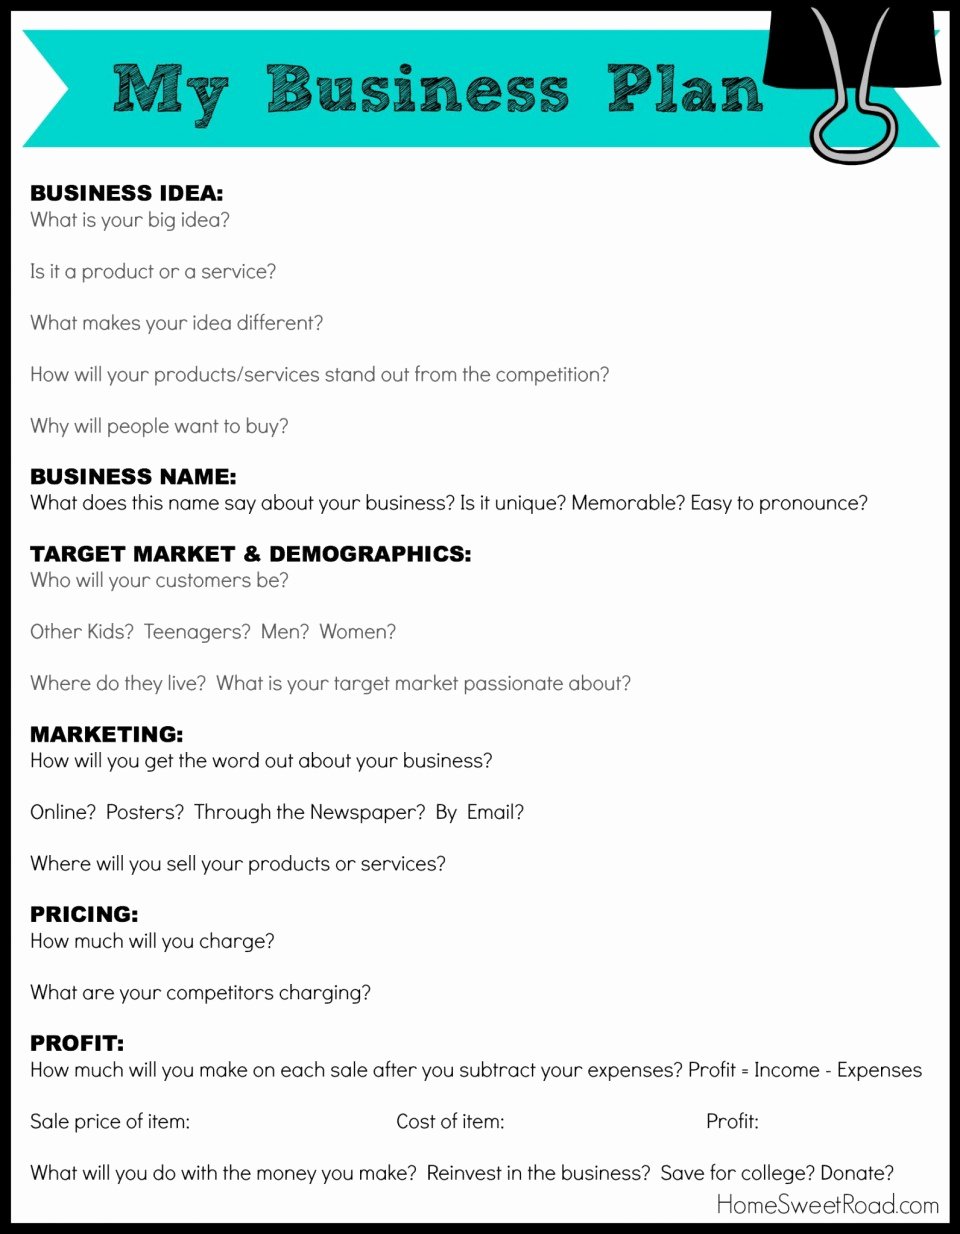 Free Dispensary Business Plan Template New 022 Free Dispensary Business Plan Template Cultivation